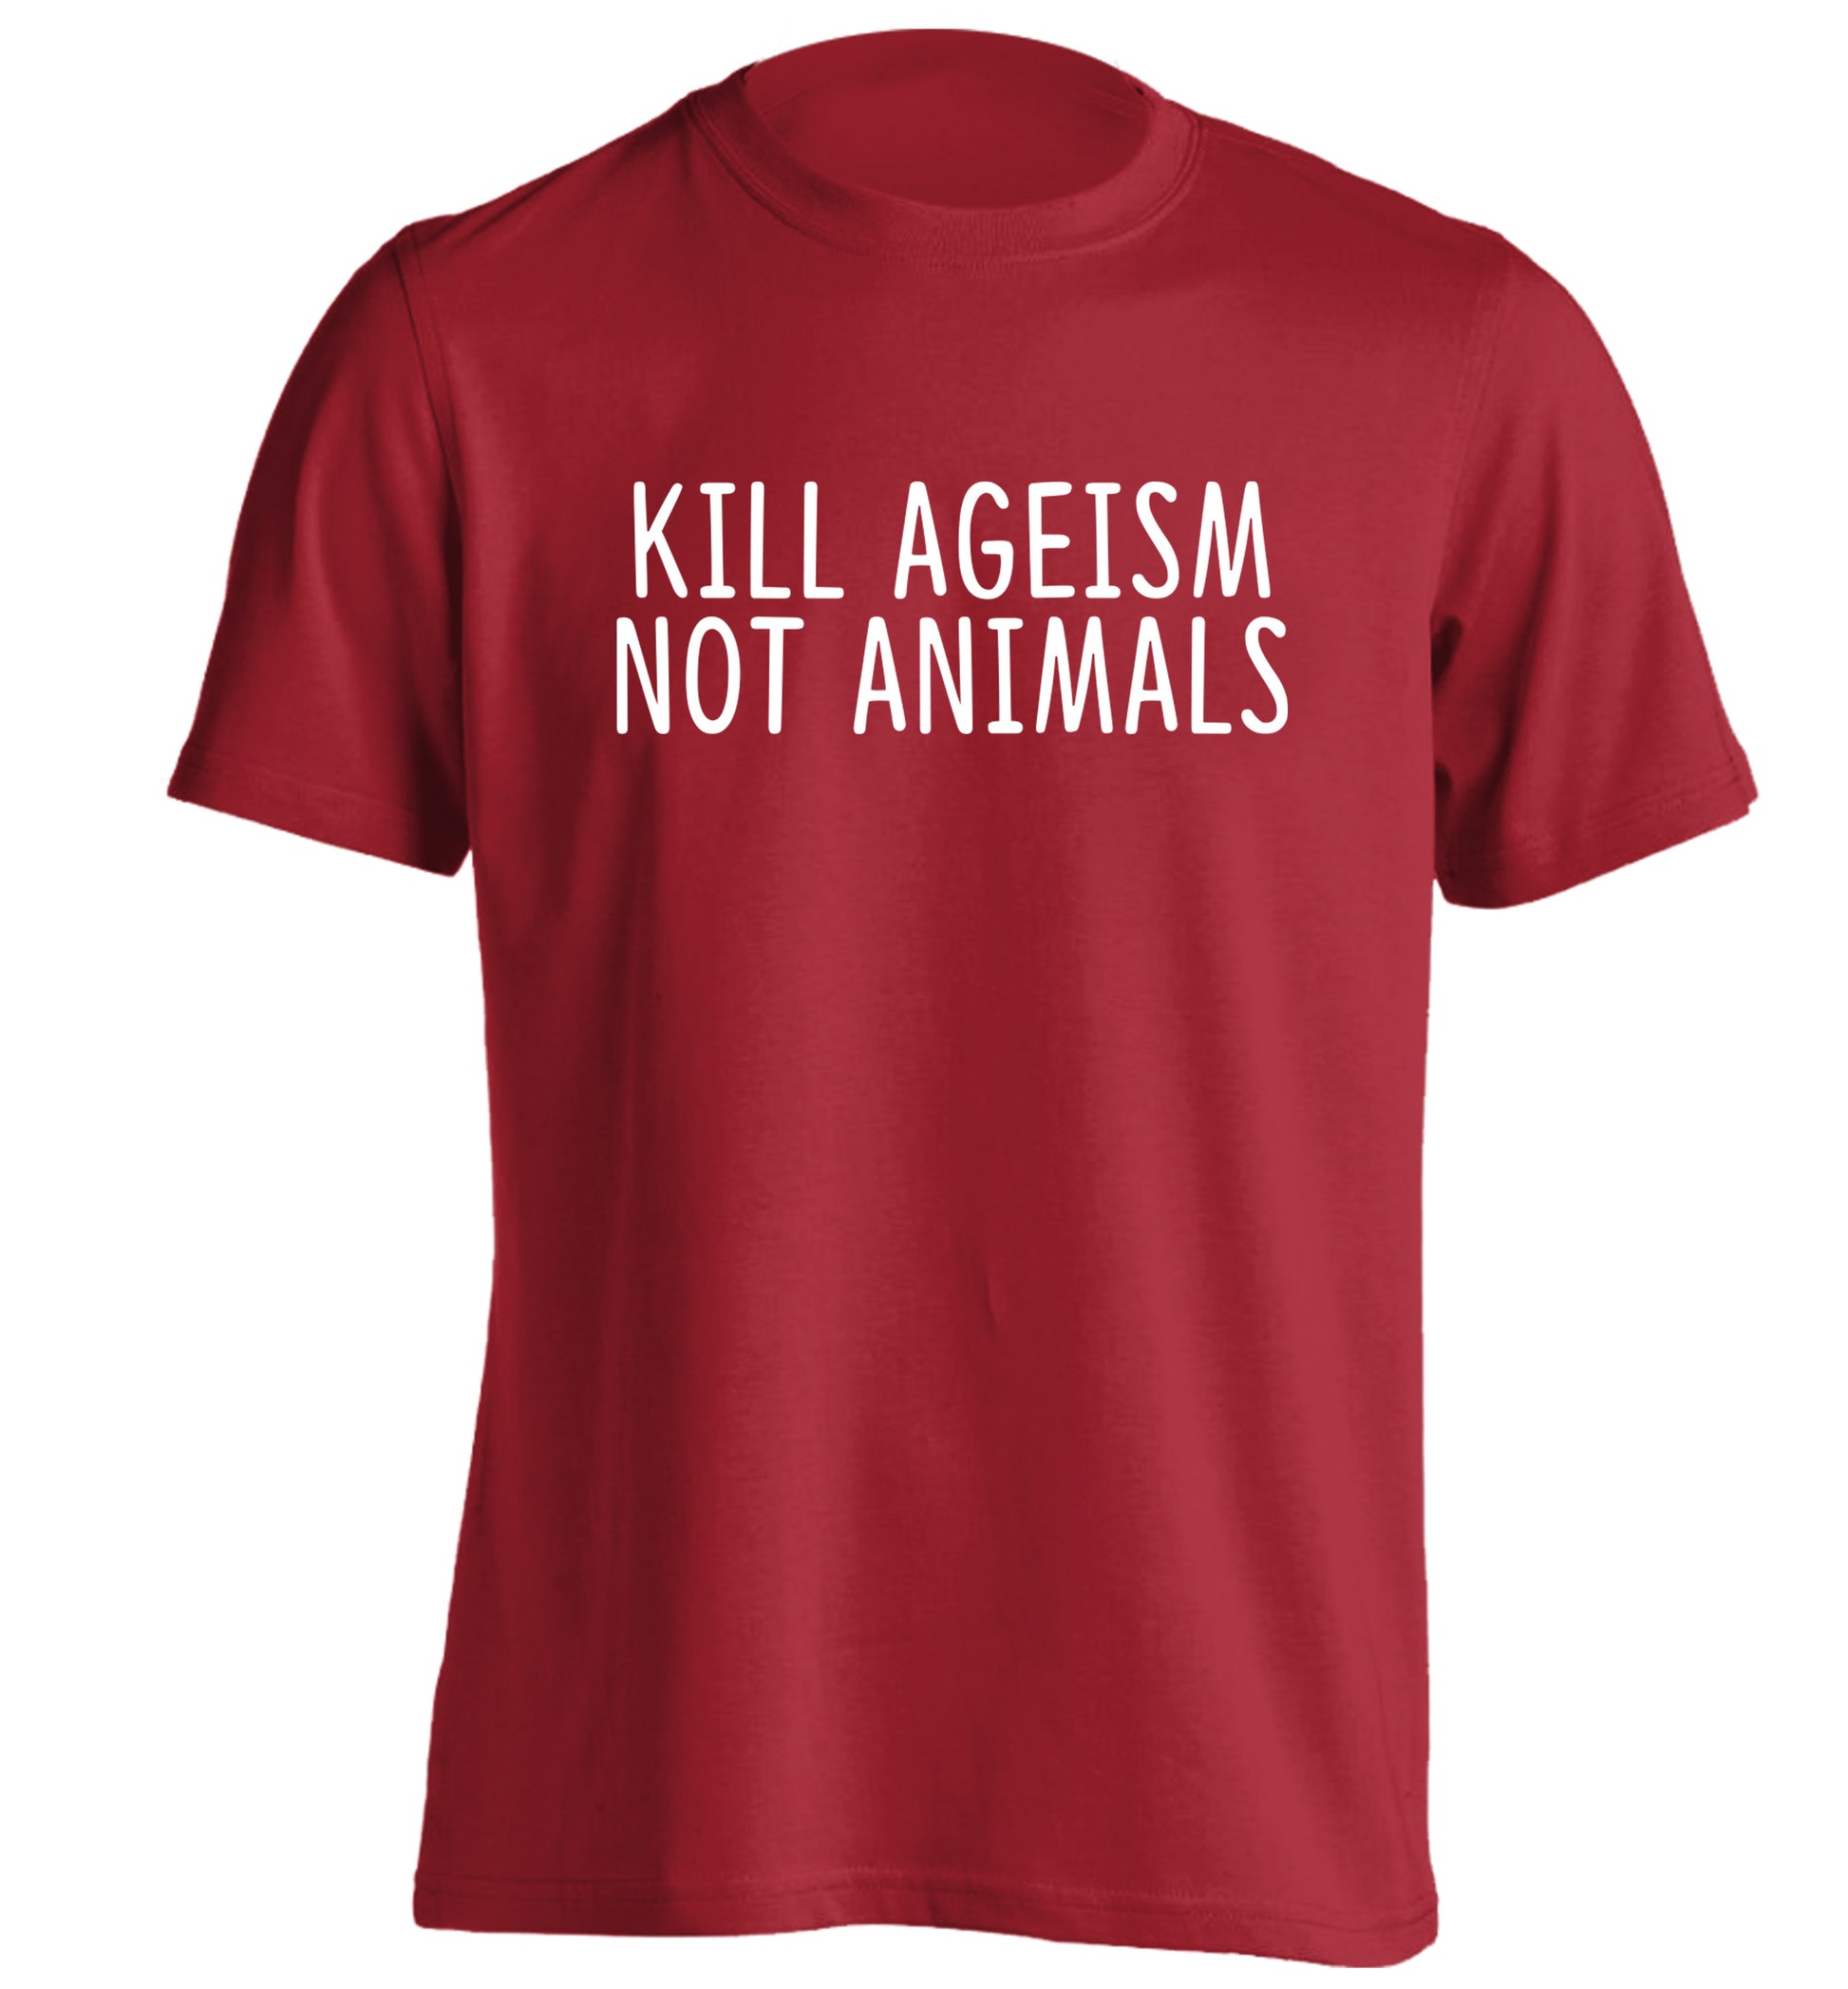 Kill Ageism Not Animals adults unisex red Tshirt 2XL